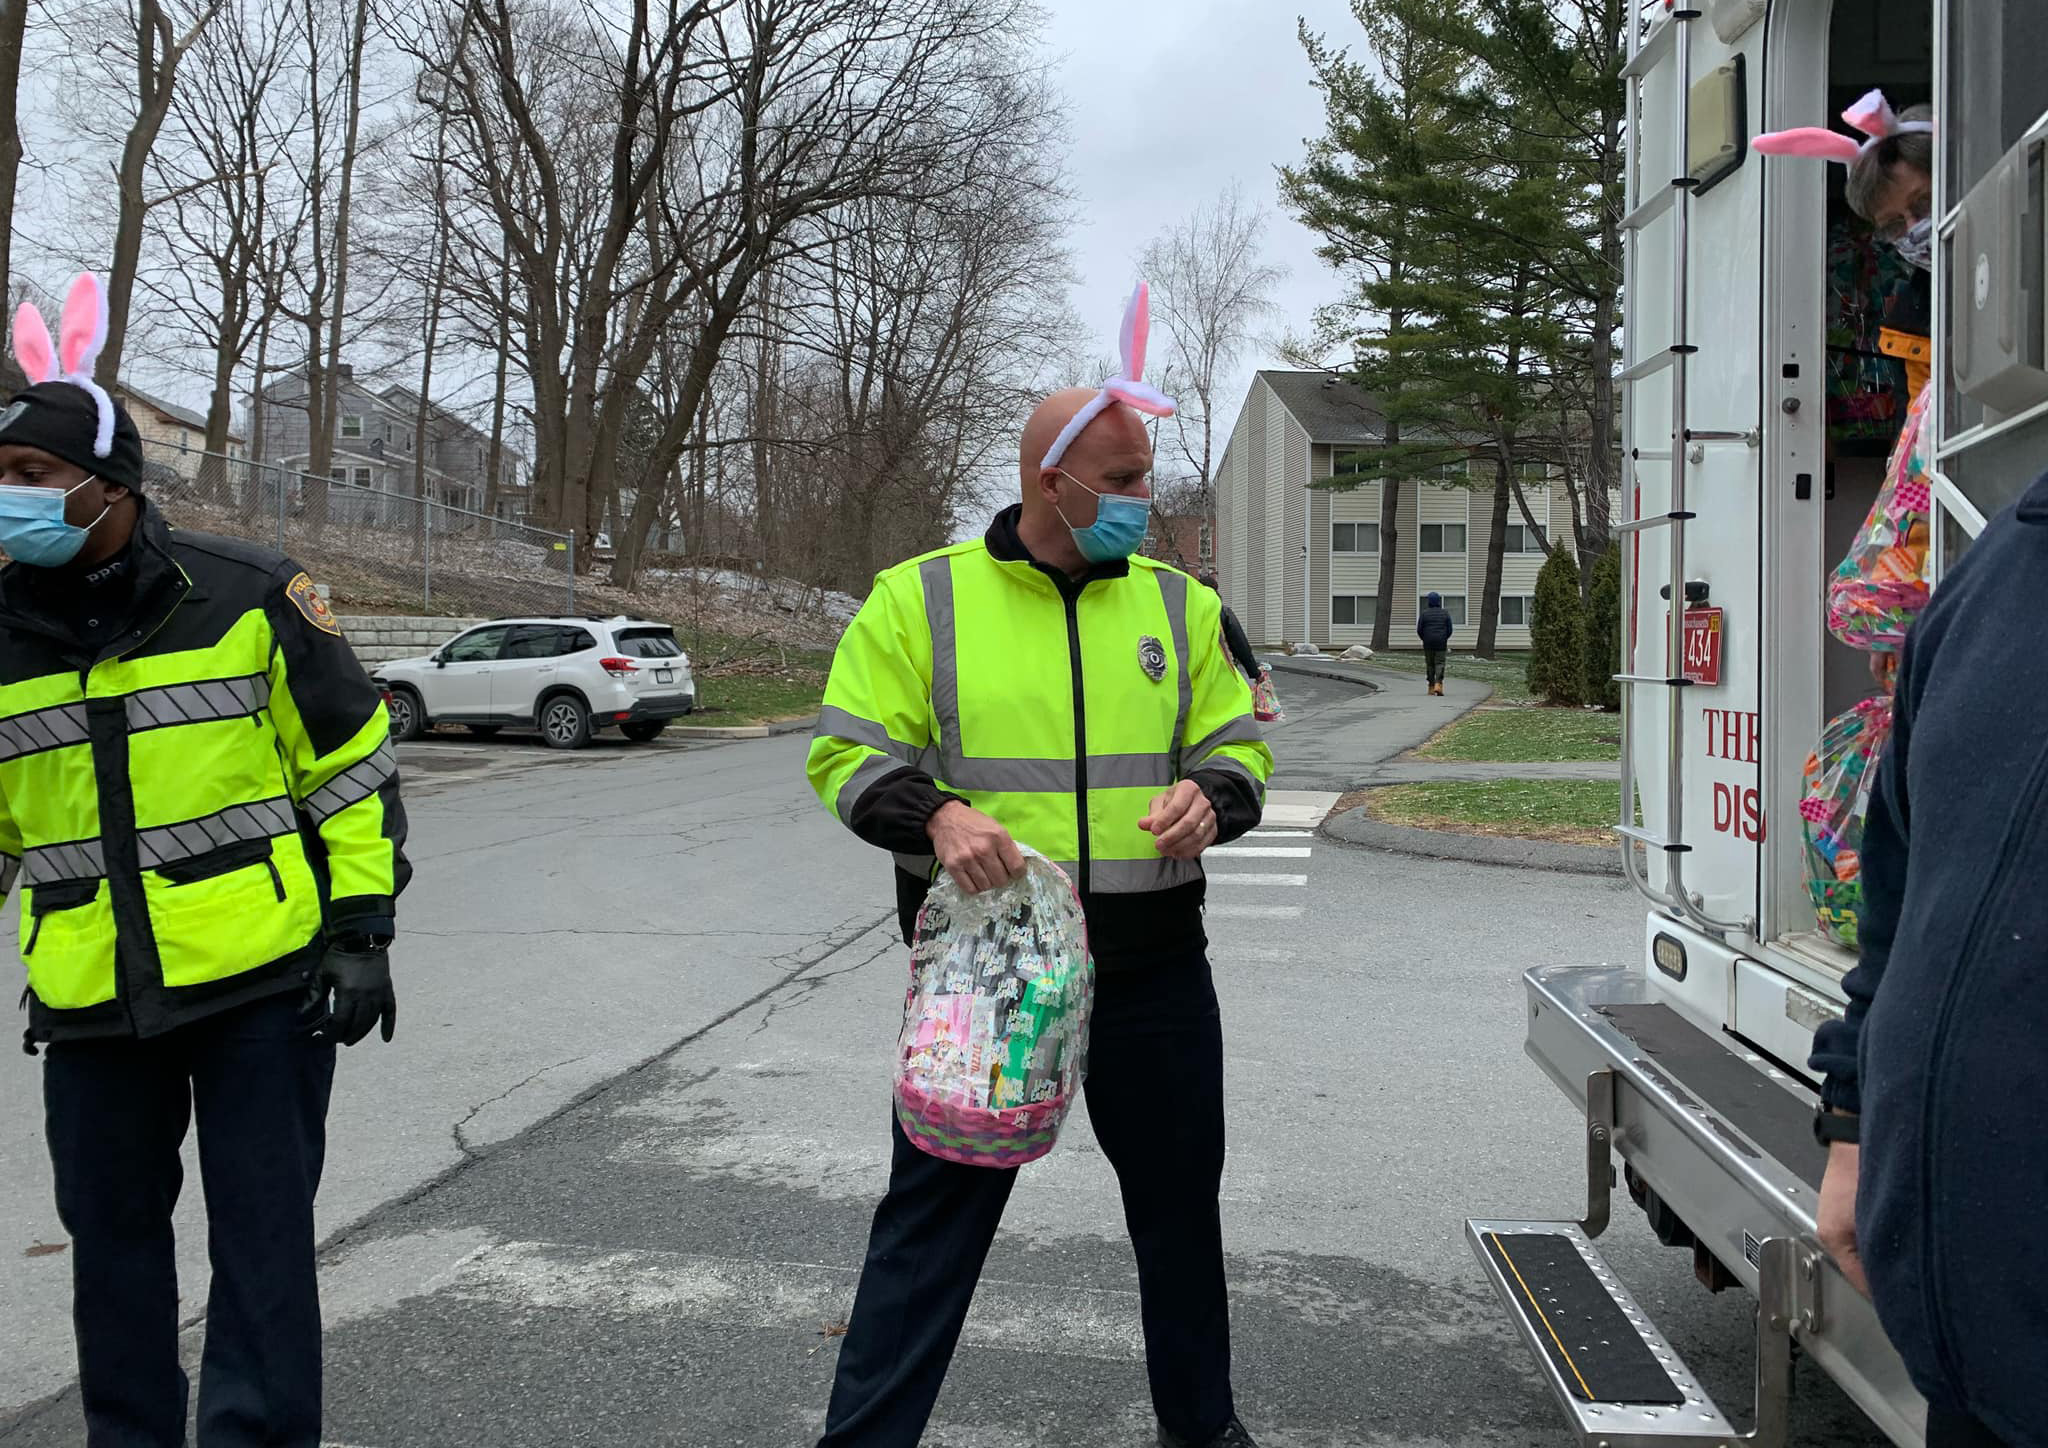 Pittsfield Police offers assist with basket distribution